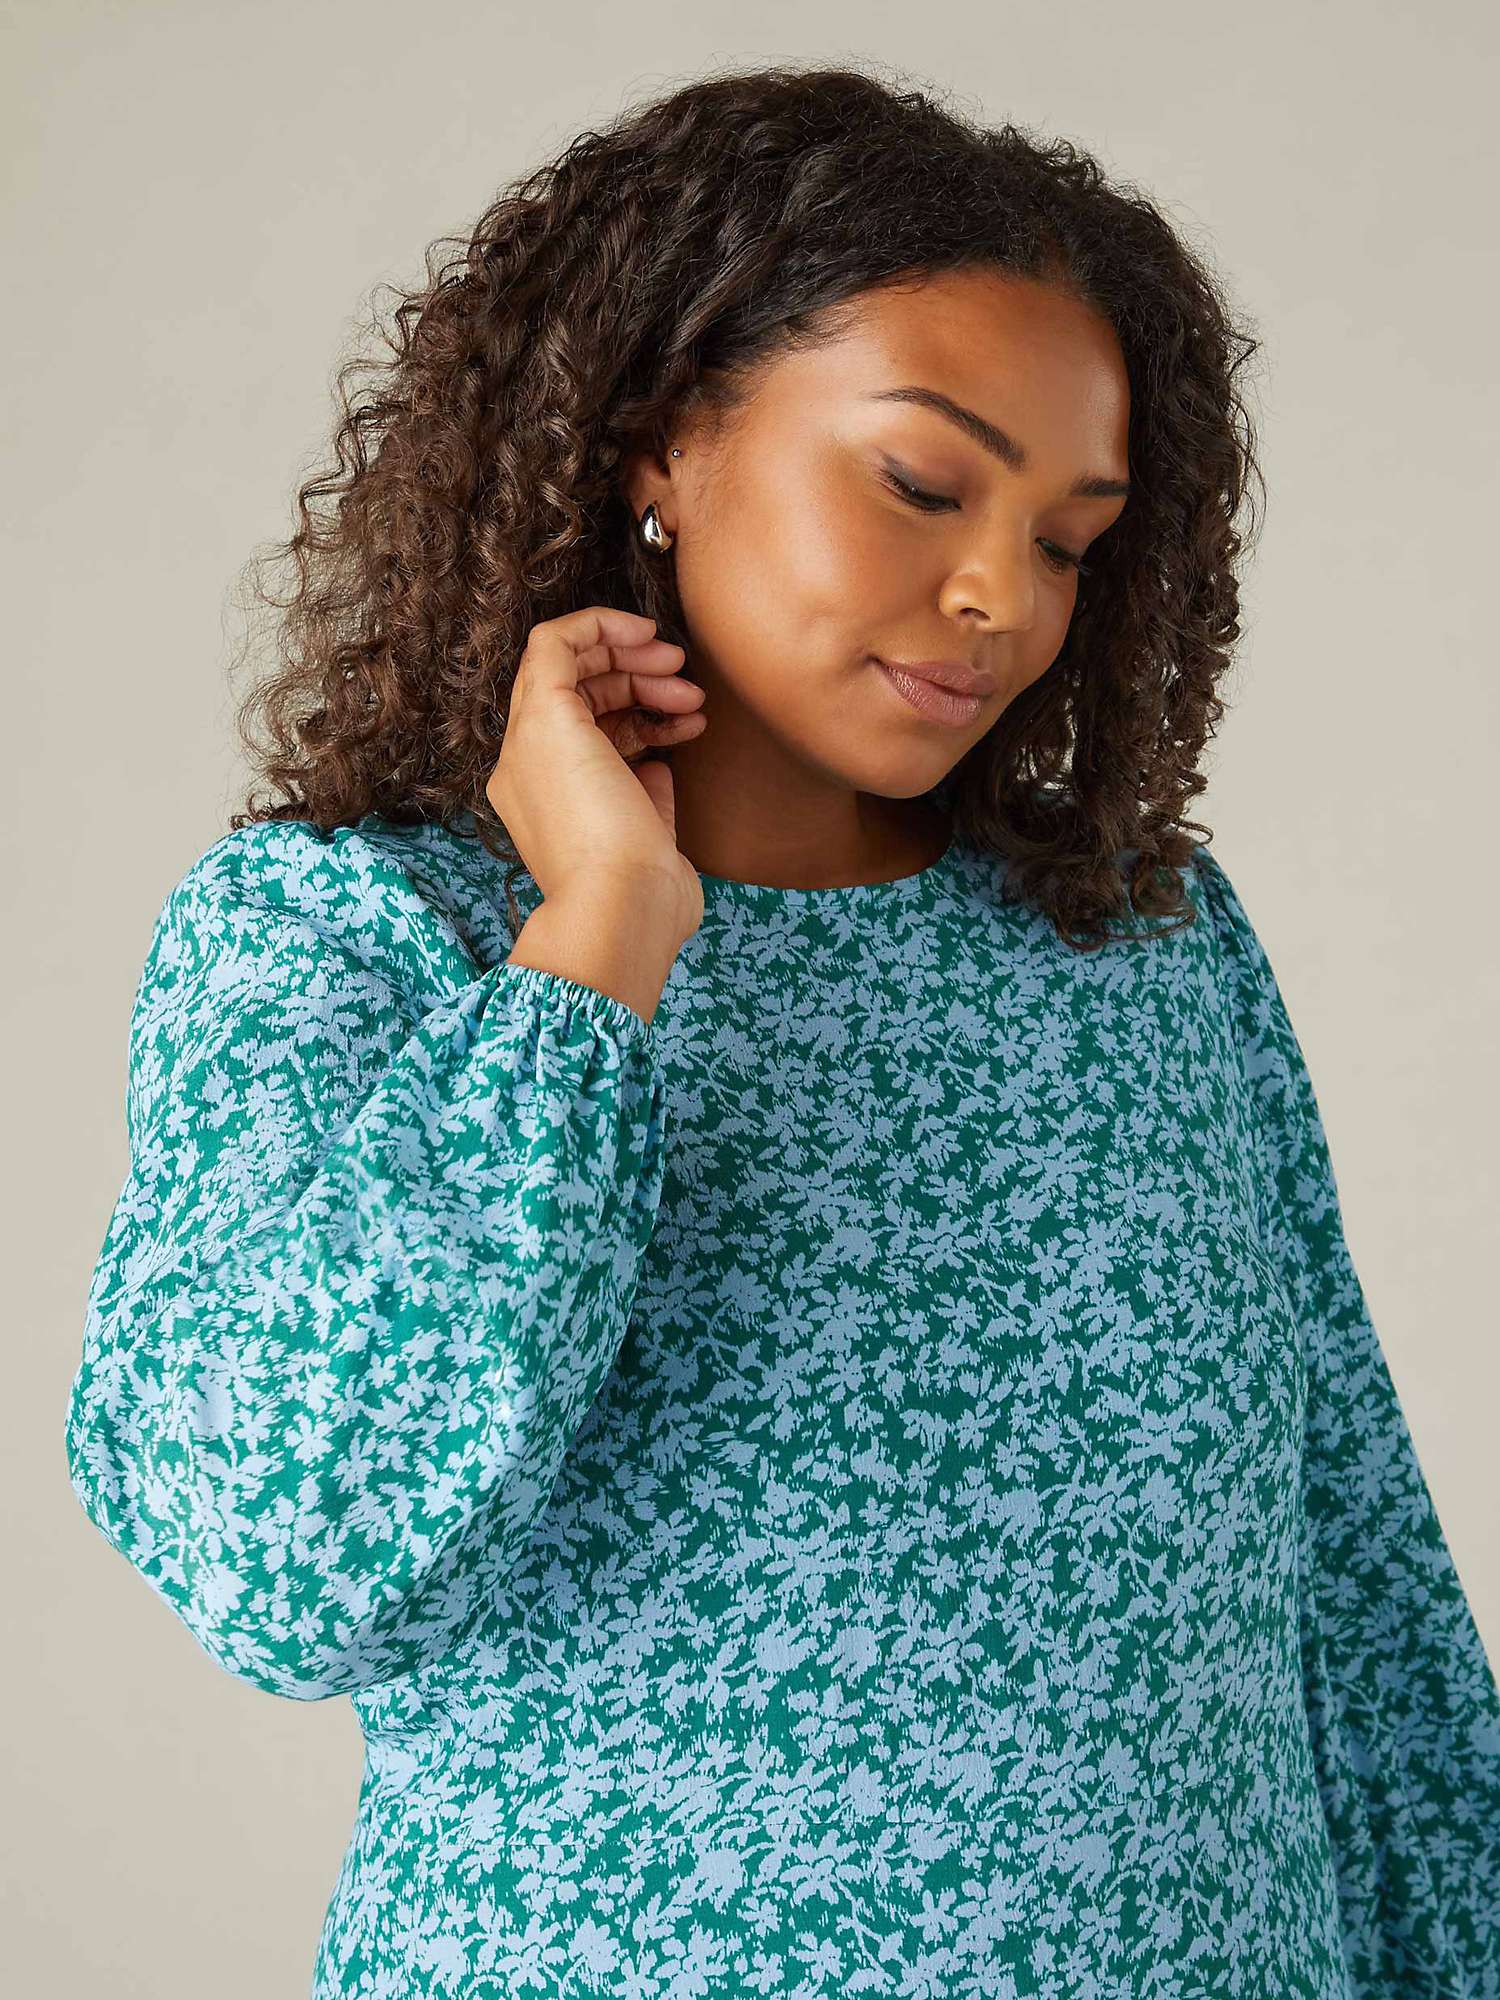 Buy Live Unlimited Curve Ditsy Print Tiered Midi Dress, Blue Online at johnlewis.com